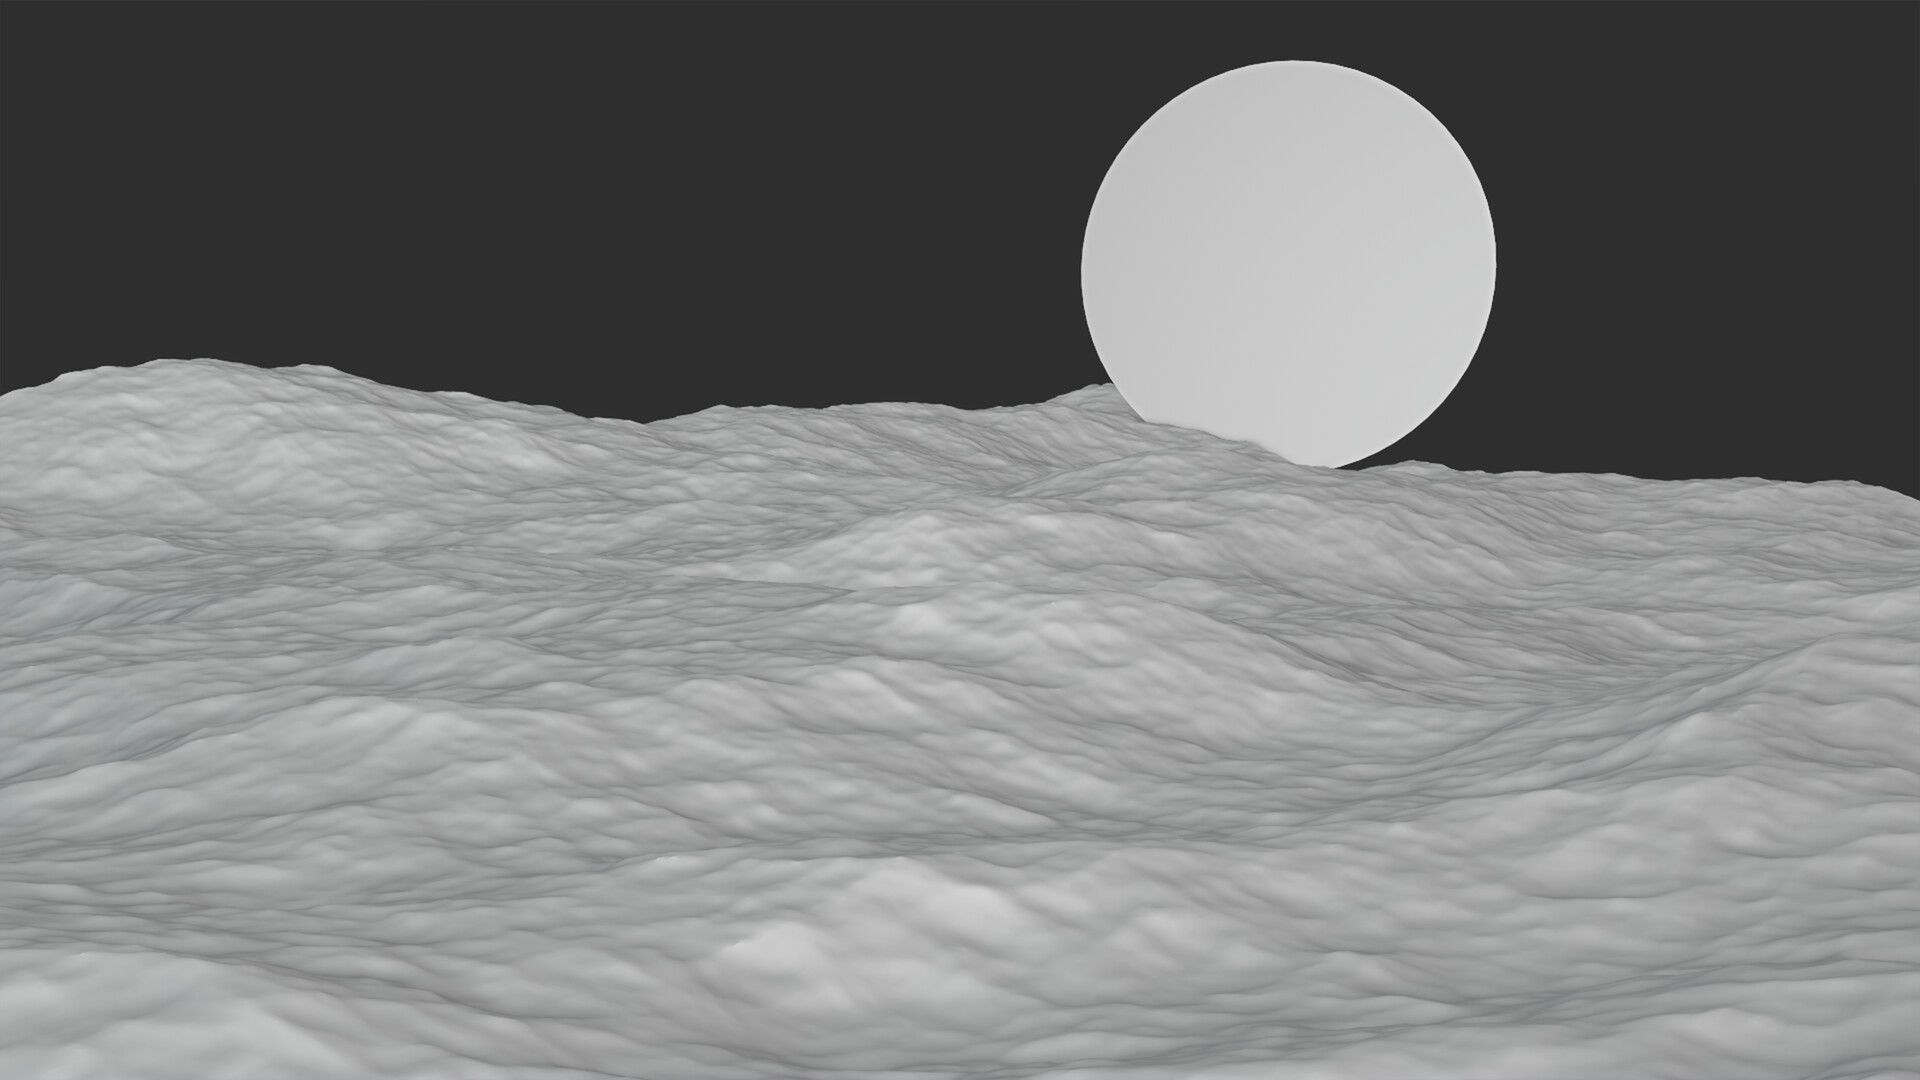 A 3D rendering of a planet with a white sphere for the sun - Lo fi